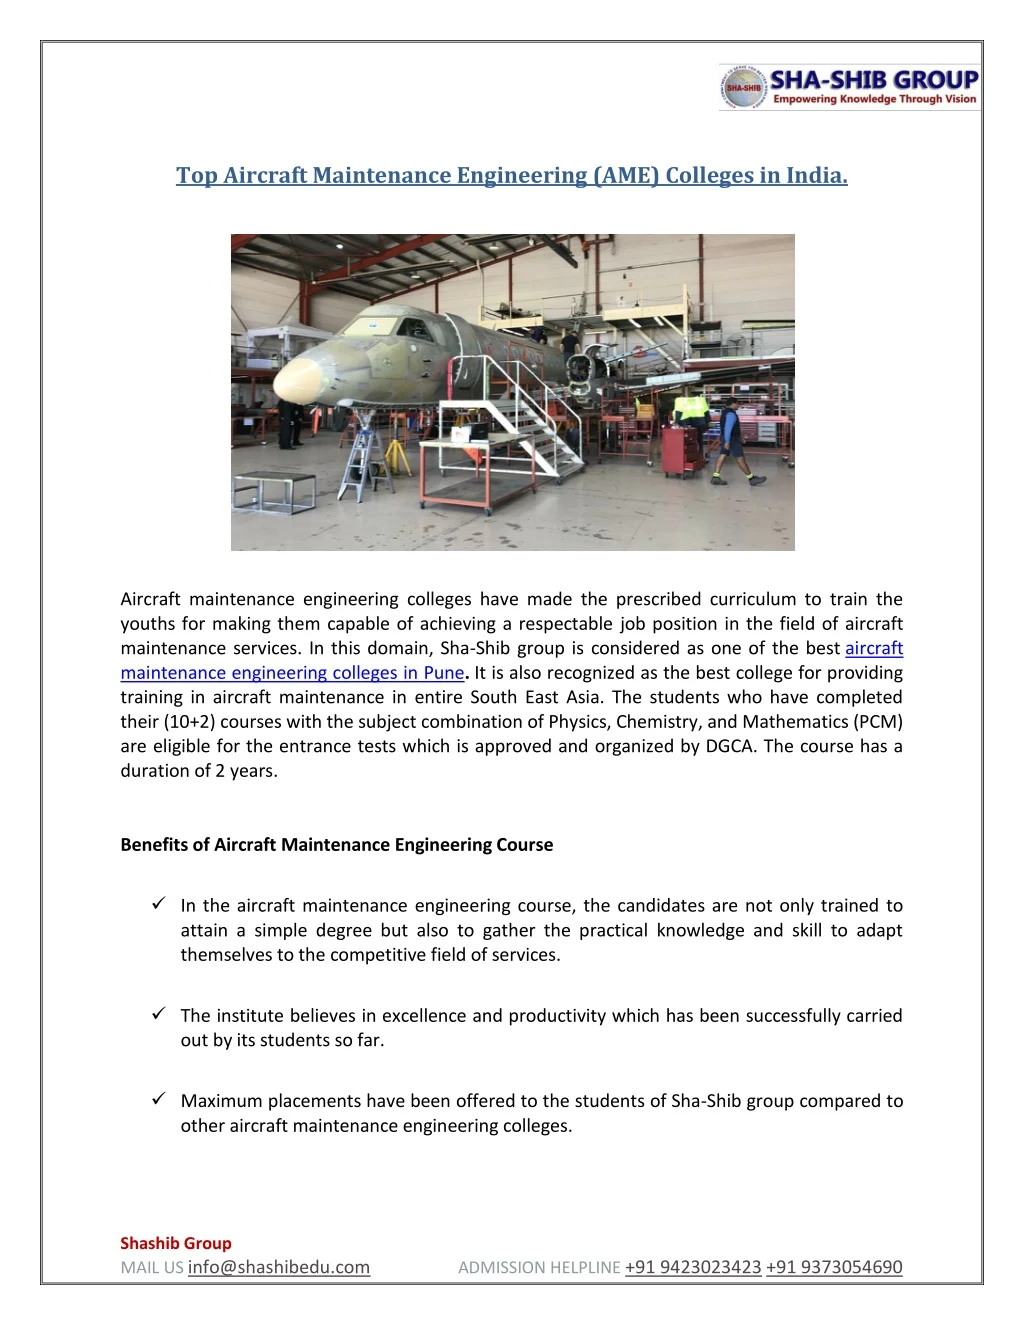 top aircraft maintenance engineering ame colleges